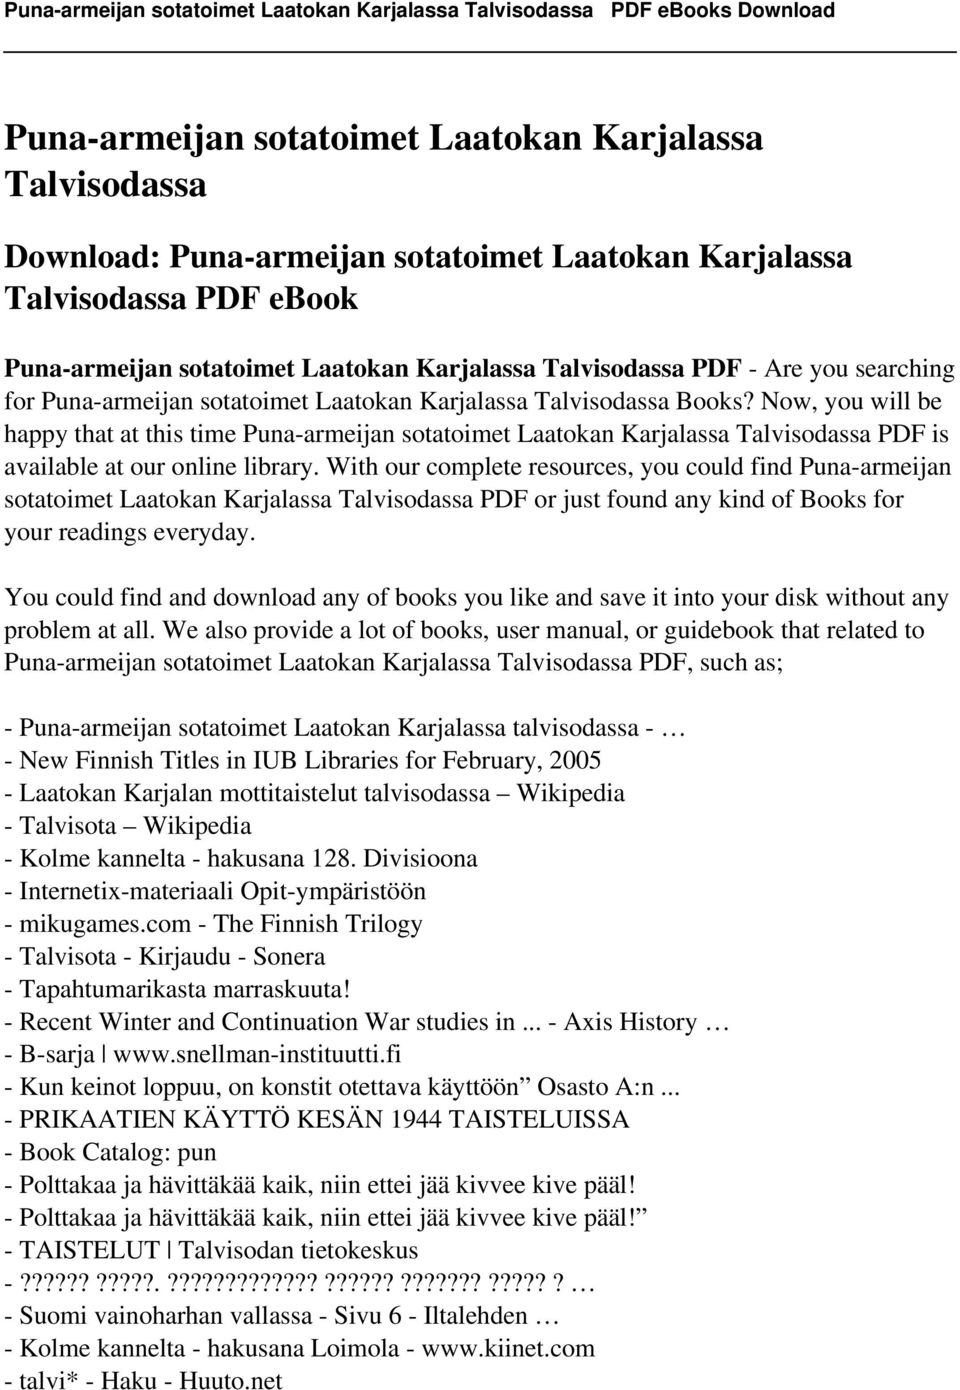 Now, you will be happy that at this time Puna-armeijan sotatoimet Laatokan Karjalassa Talvisodassa PDF is available at our online library.